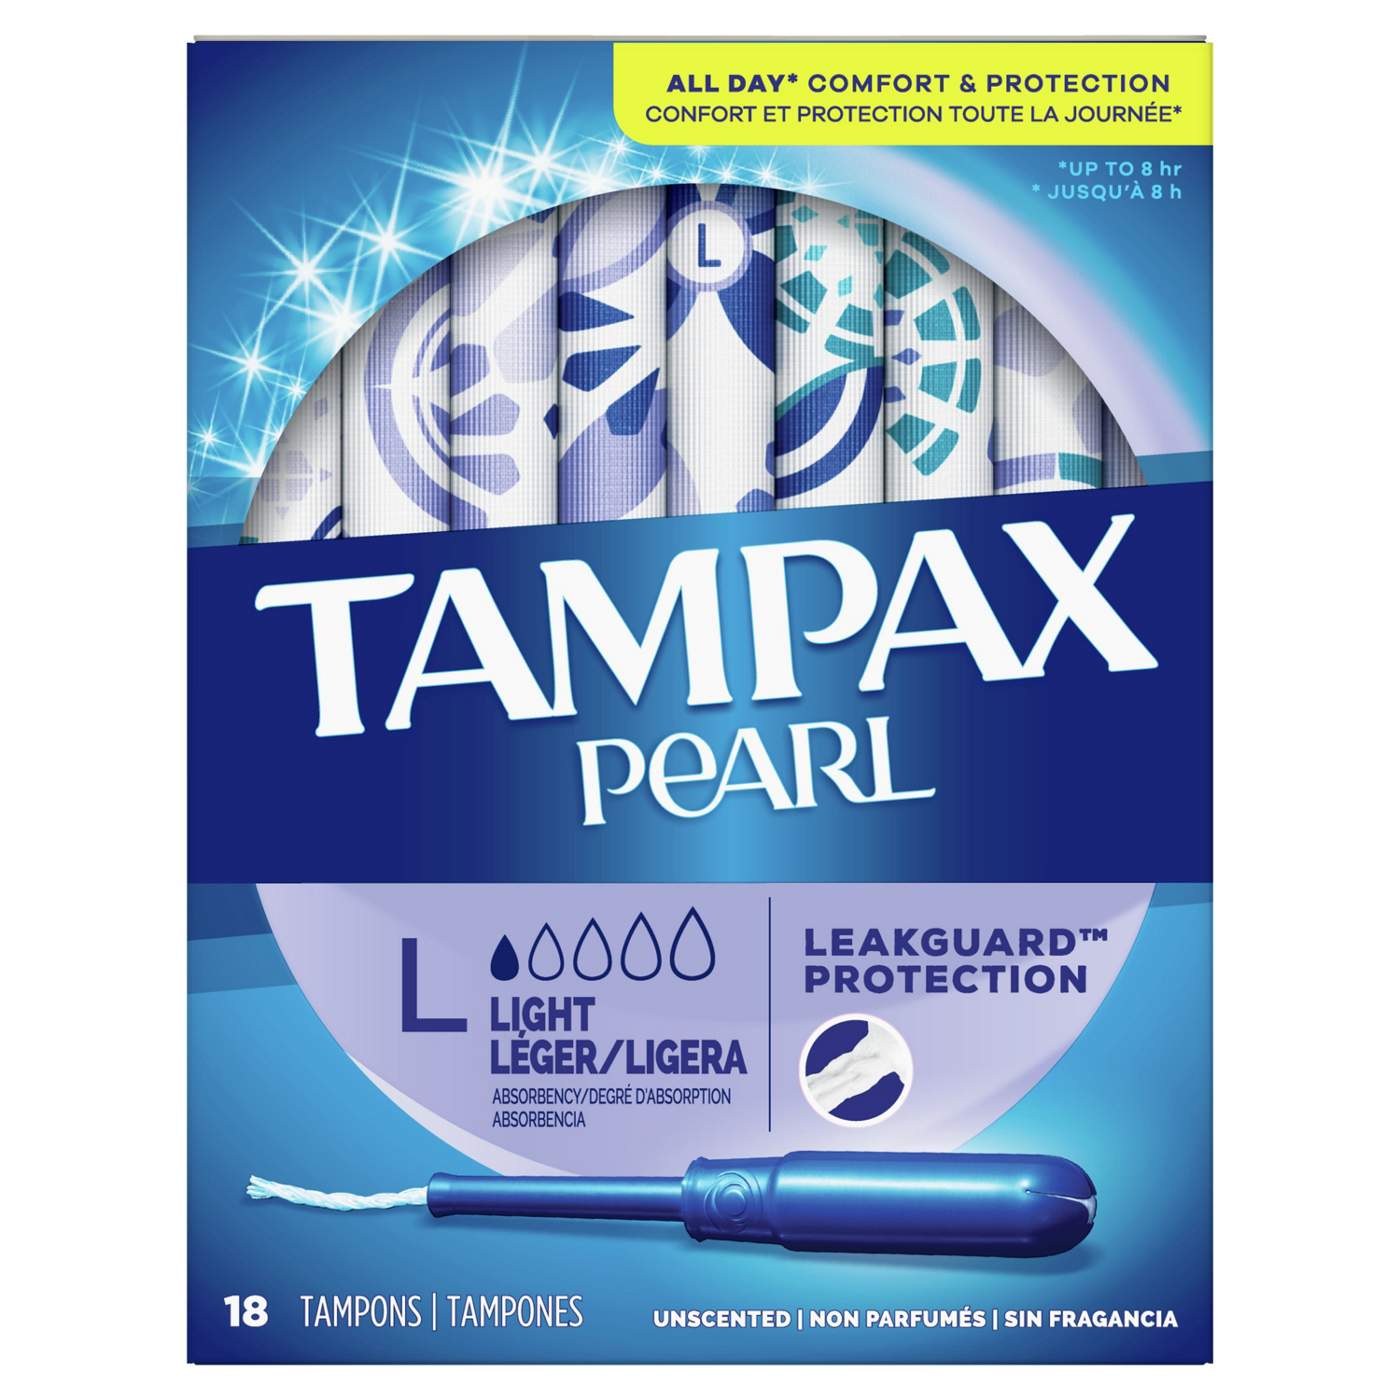 Tampax Pearl Tampons Light Unscented; image 1 of 5